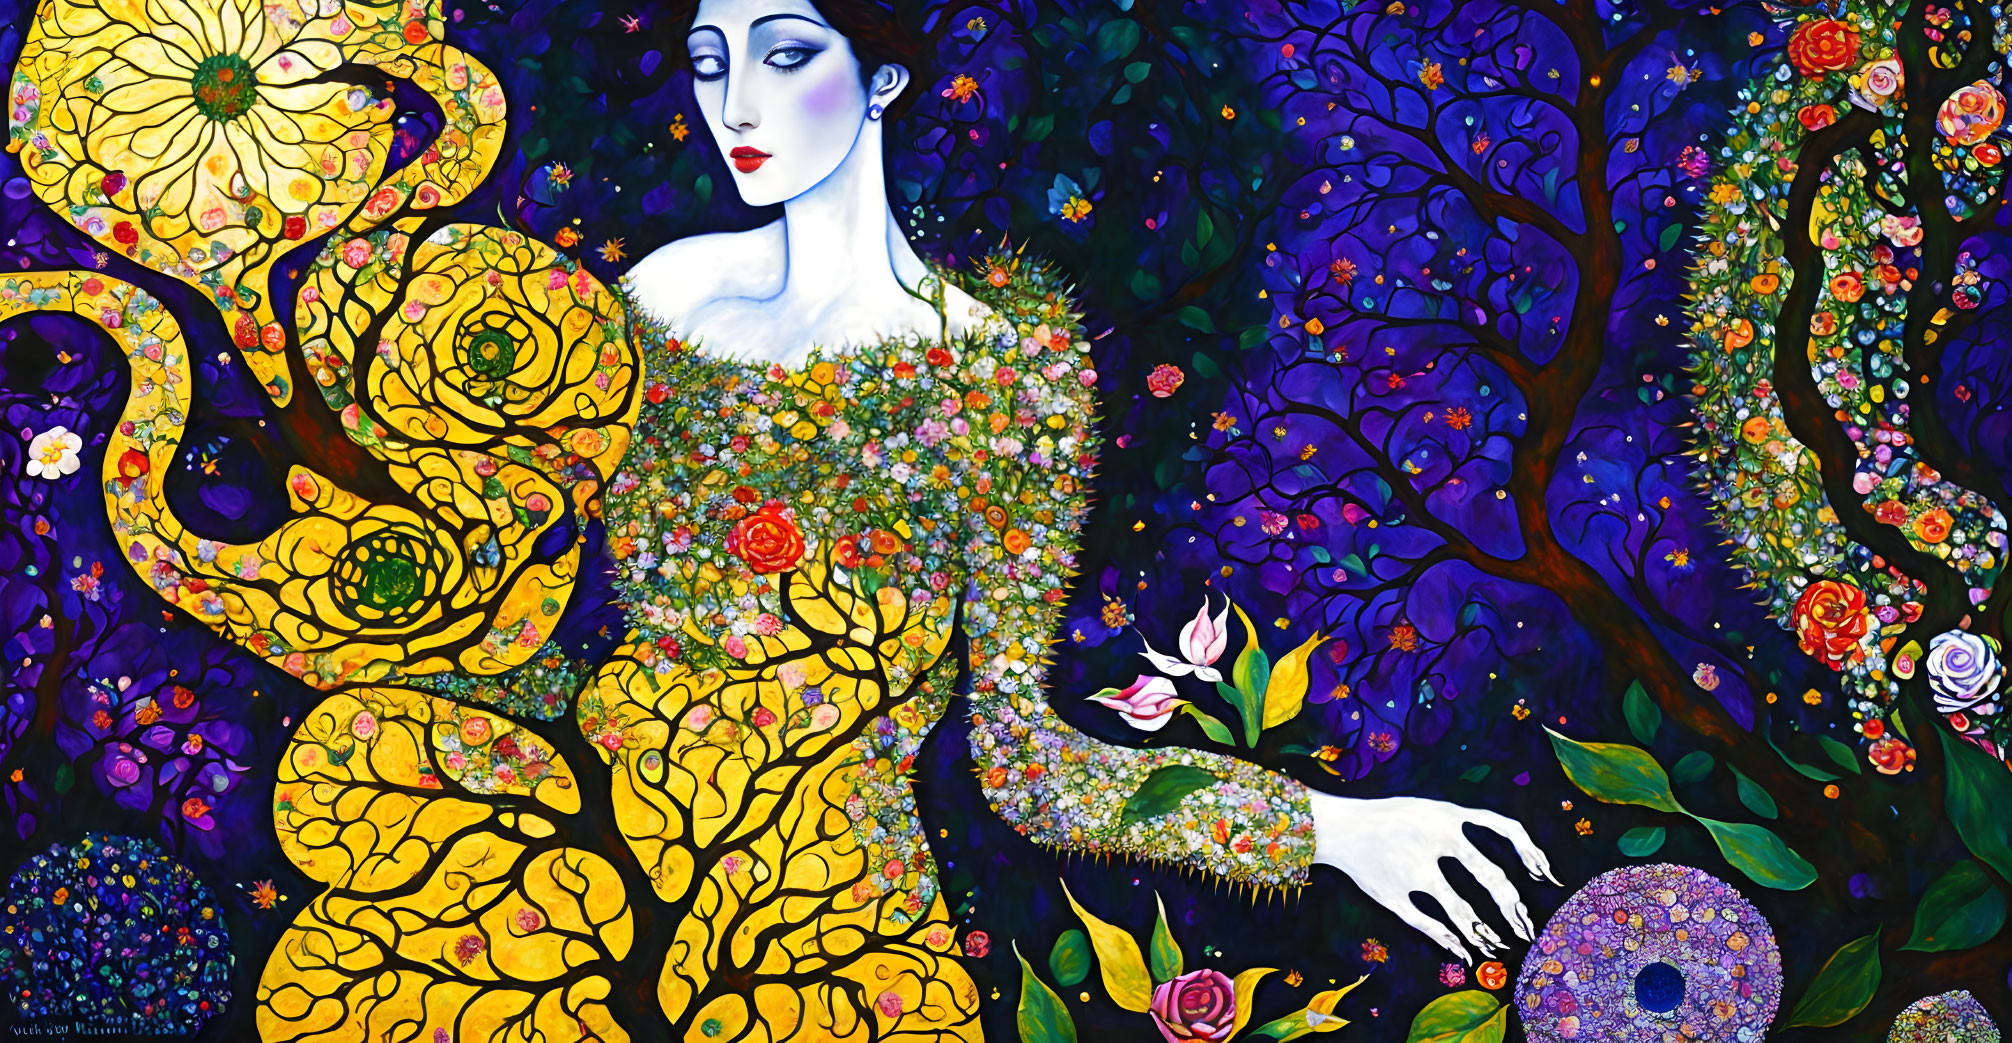 Colorful artwork of woman with floral patterns in whimsical garden